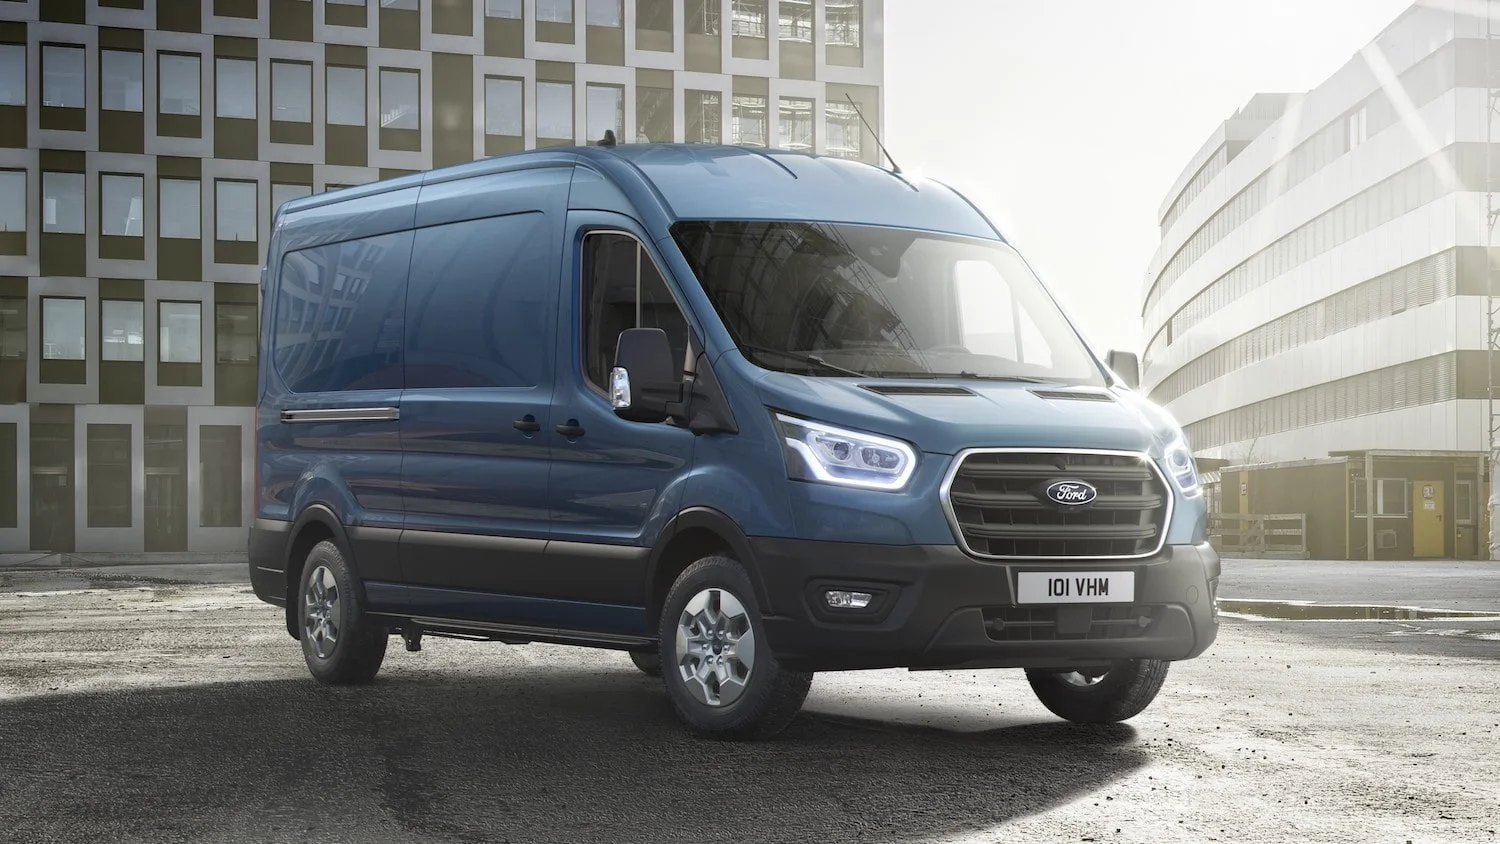 Explore & Custom Order The 2024 Ford Transit Lineup